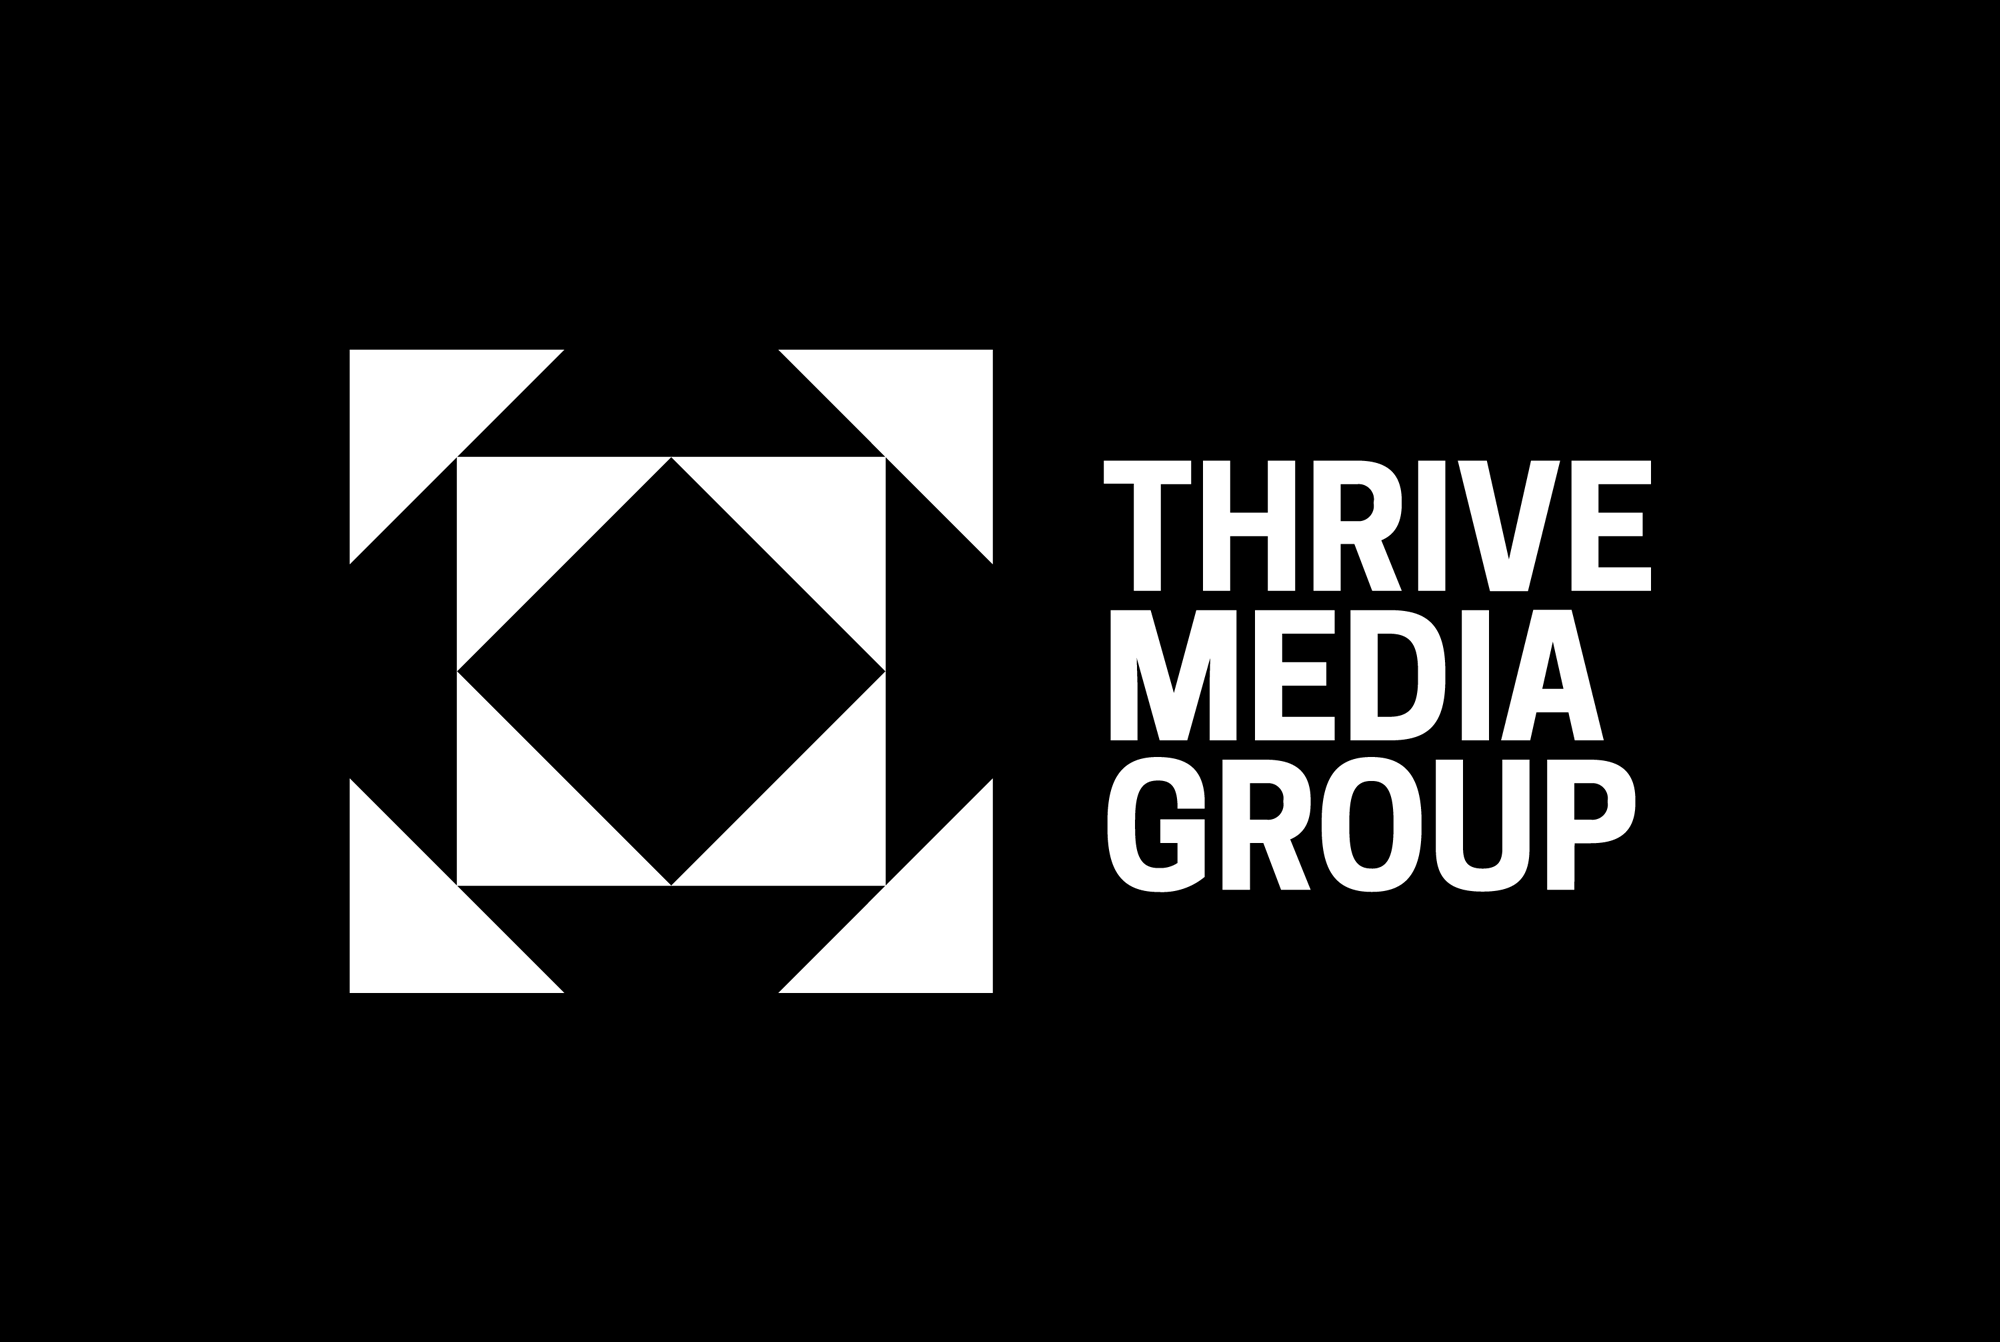 thrive_media_group_logo_a.png